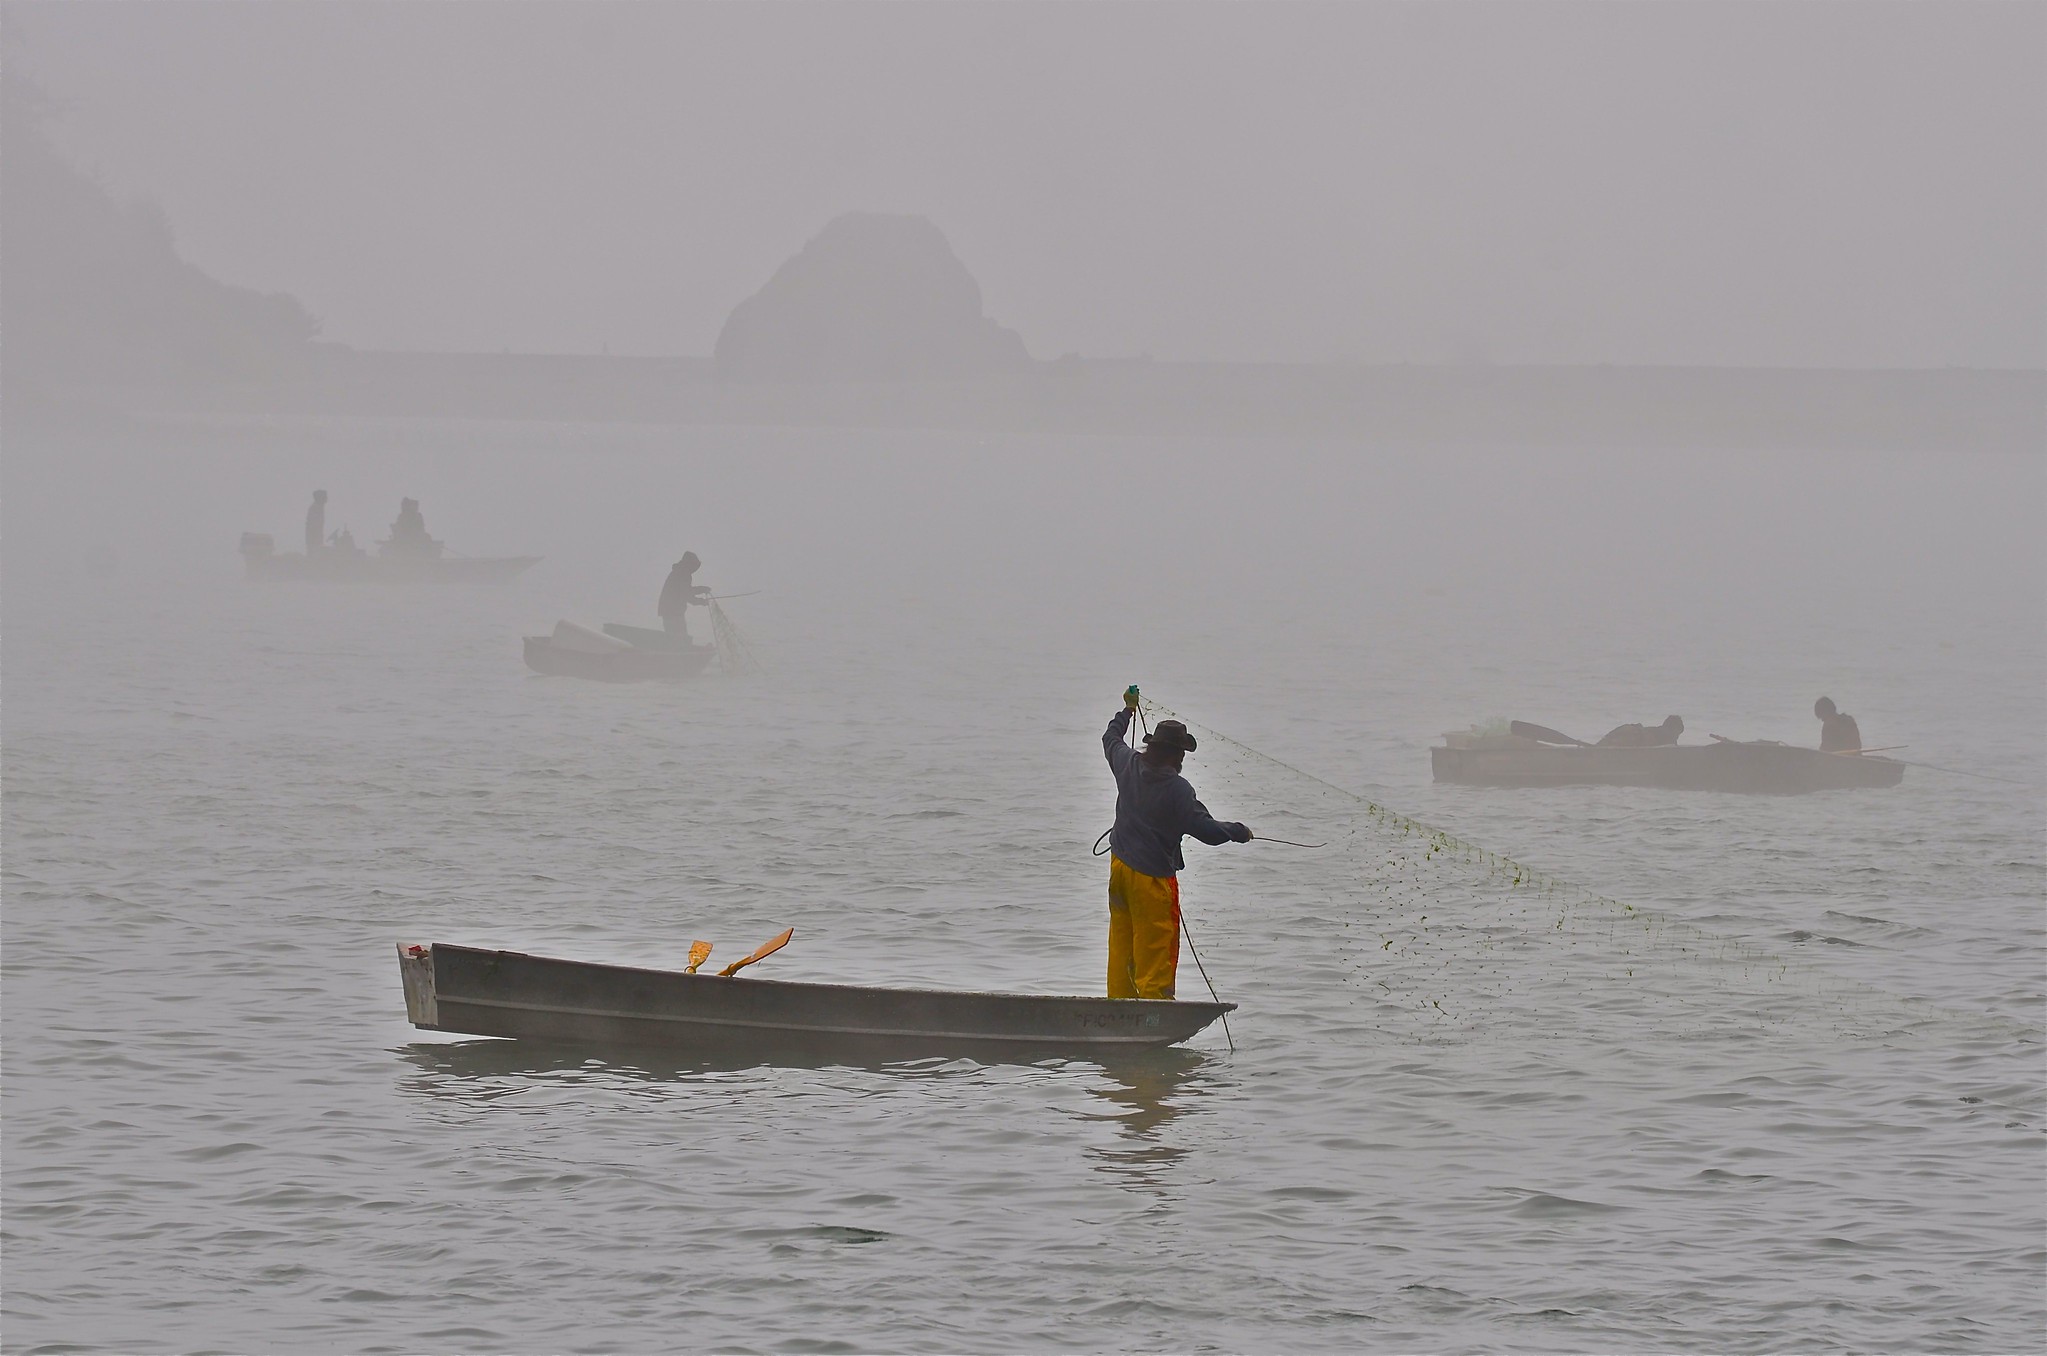 Photograph of Yurok people fishing in the Klamath River. The photos shows small boats (canoes or rowboats) on a river. The nearest one has a man standing in the bow with a large net. In the background, other boats have one or two people sitting or standing.